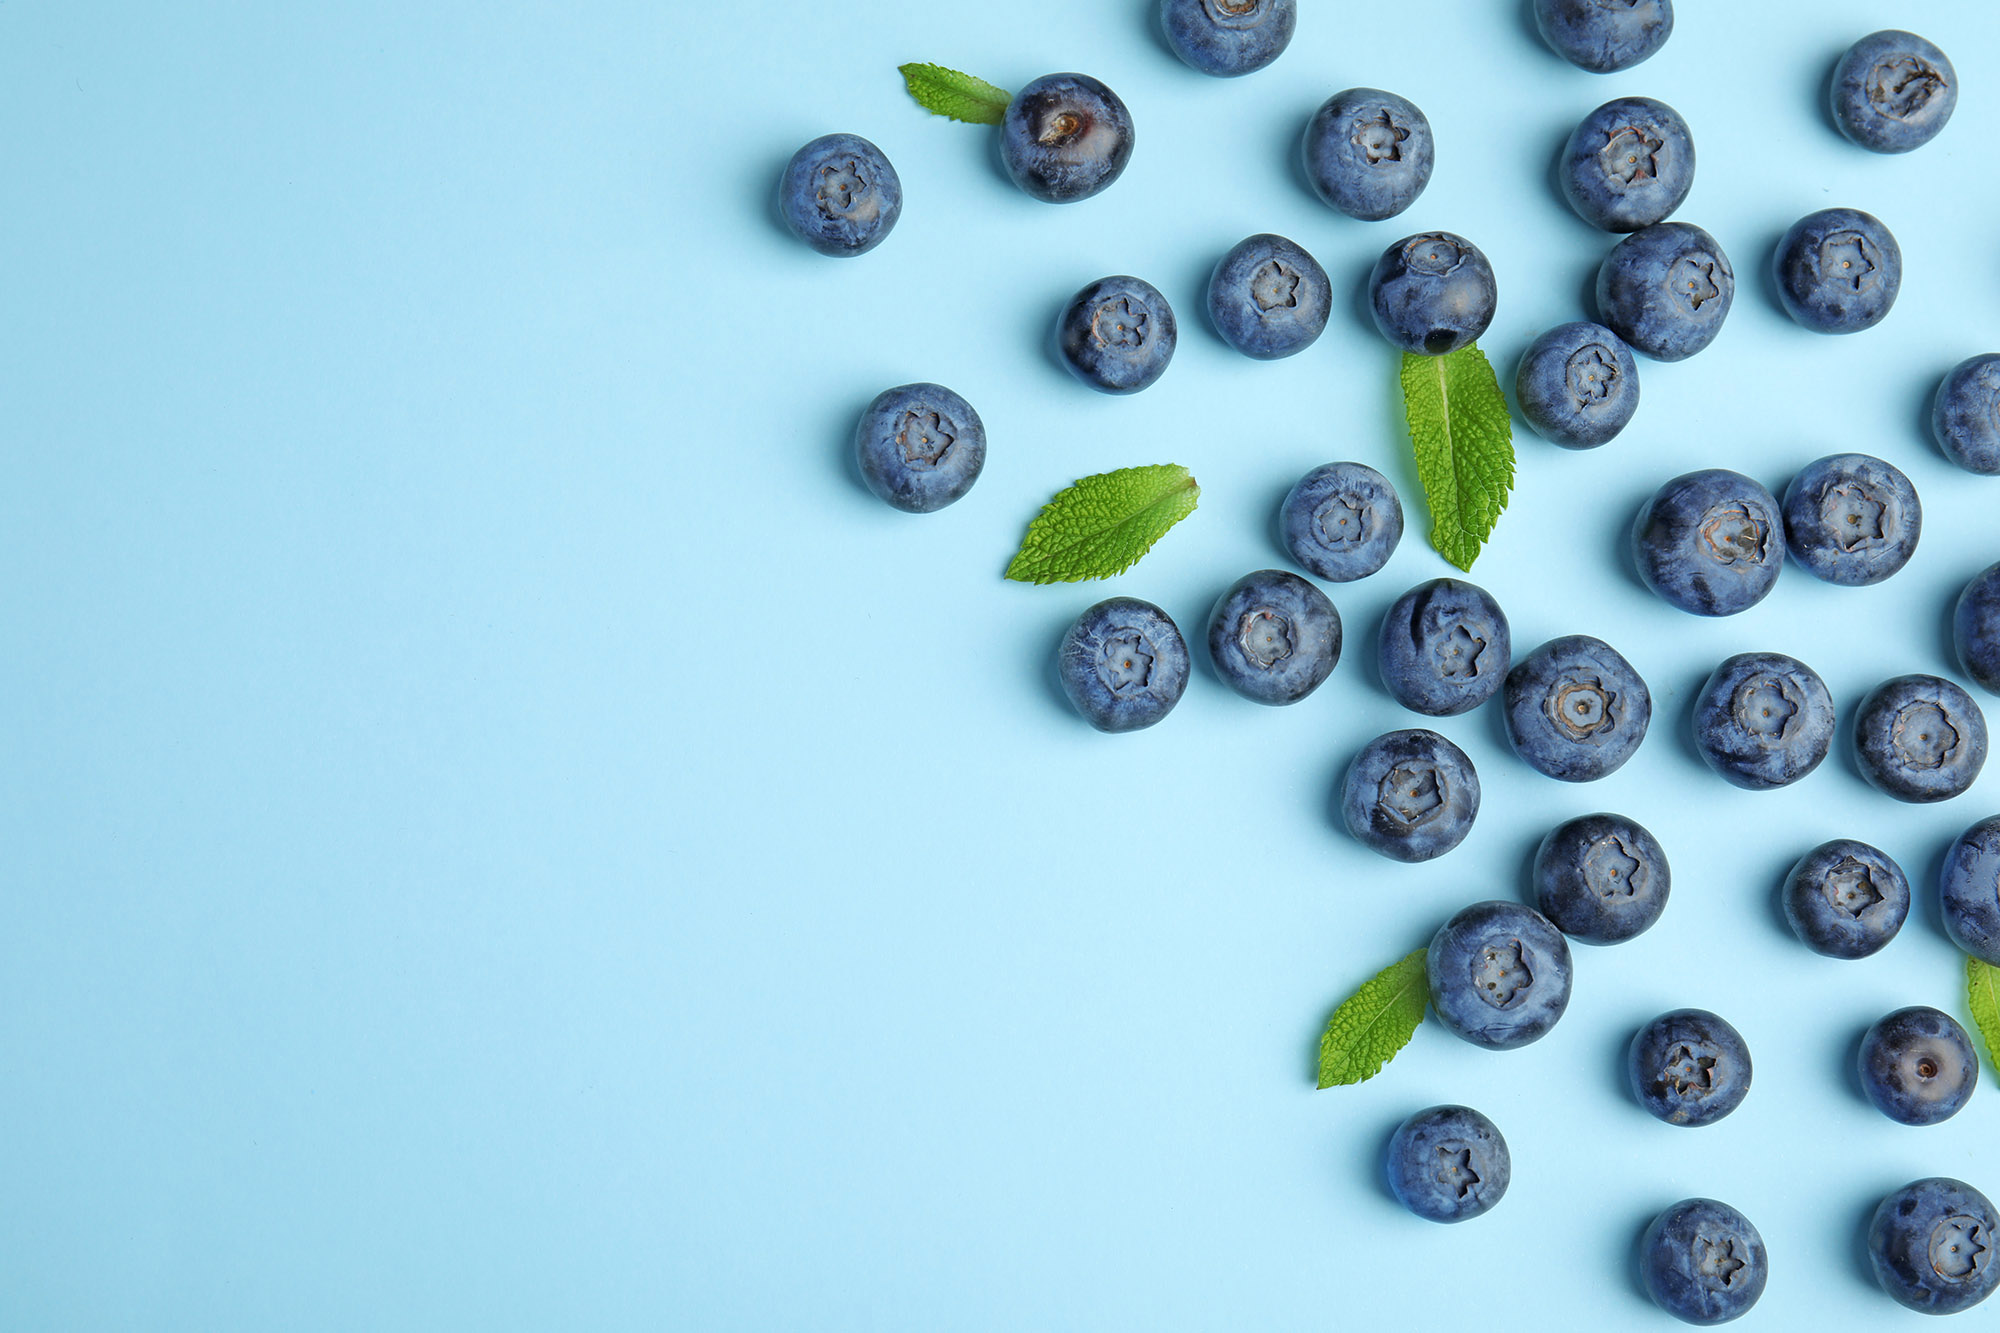 Consumers turning to jumbo blueberries more and more